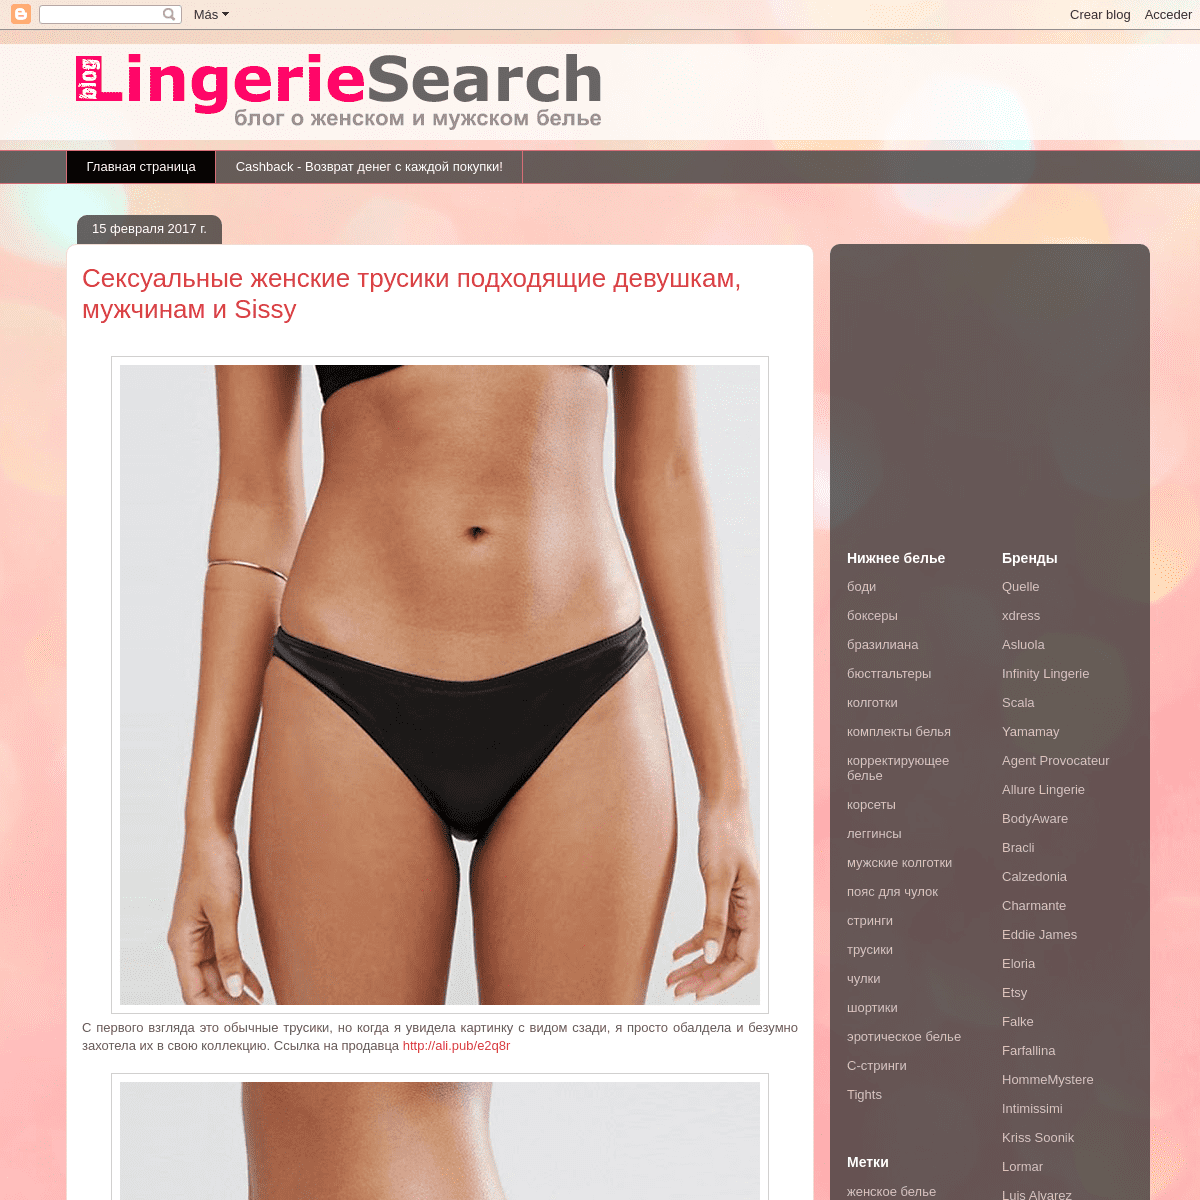 A complete backup of lingeriesearch.blogspot.com